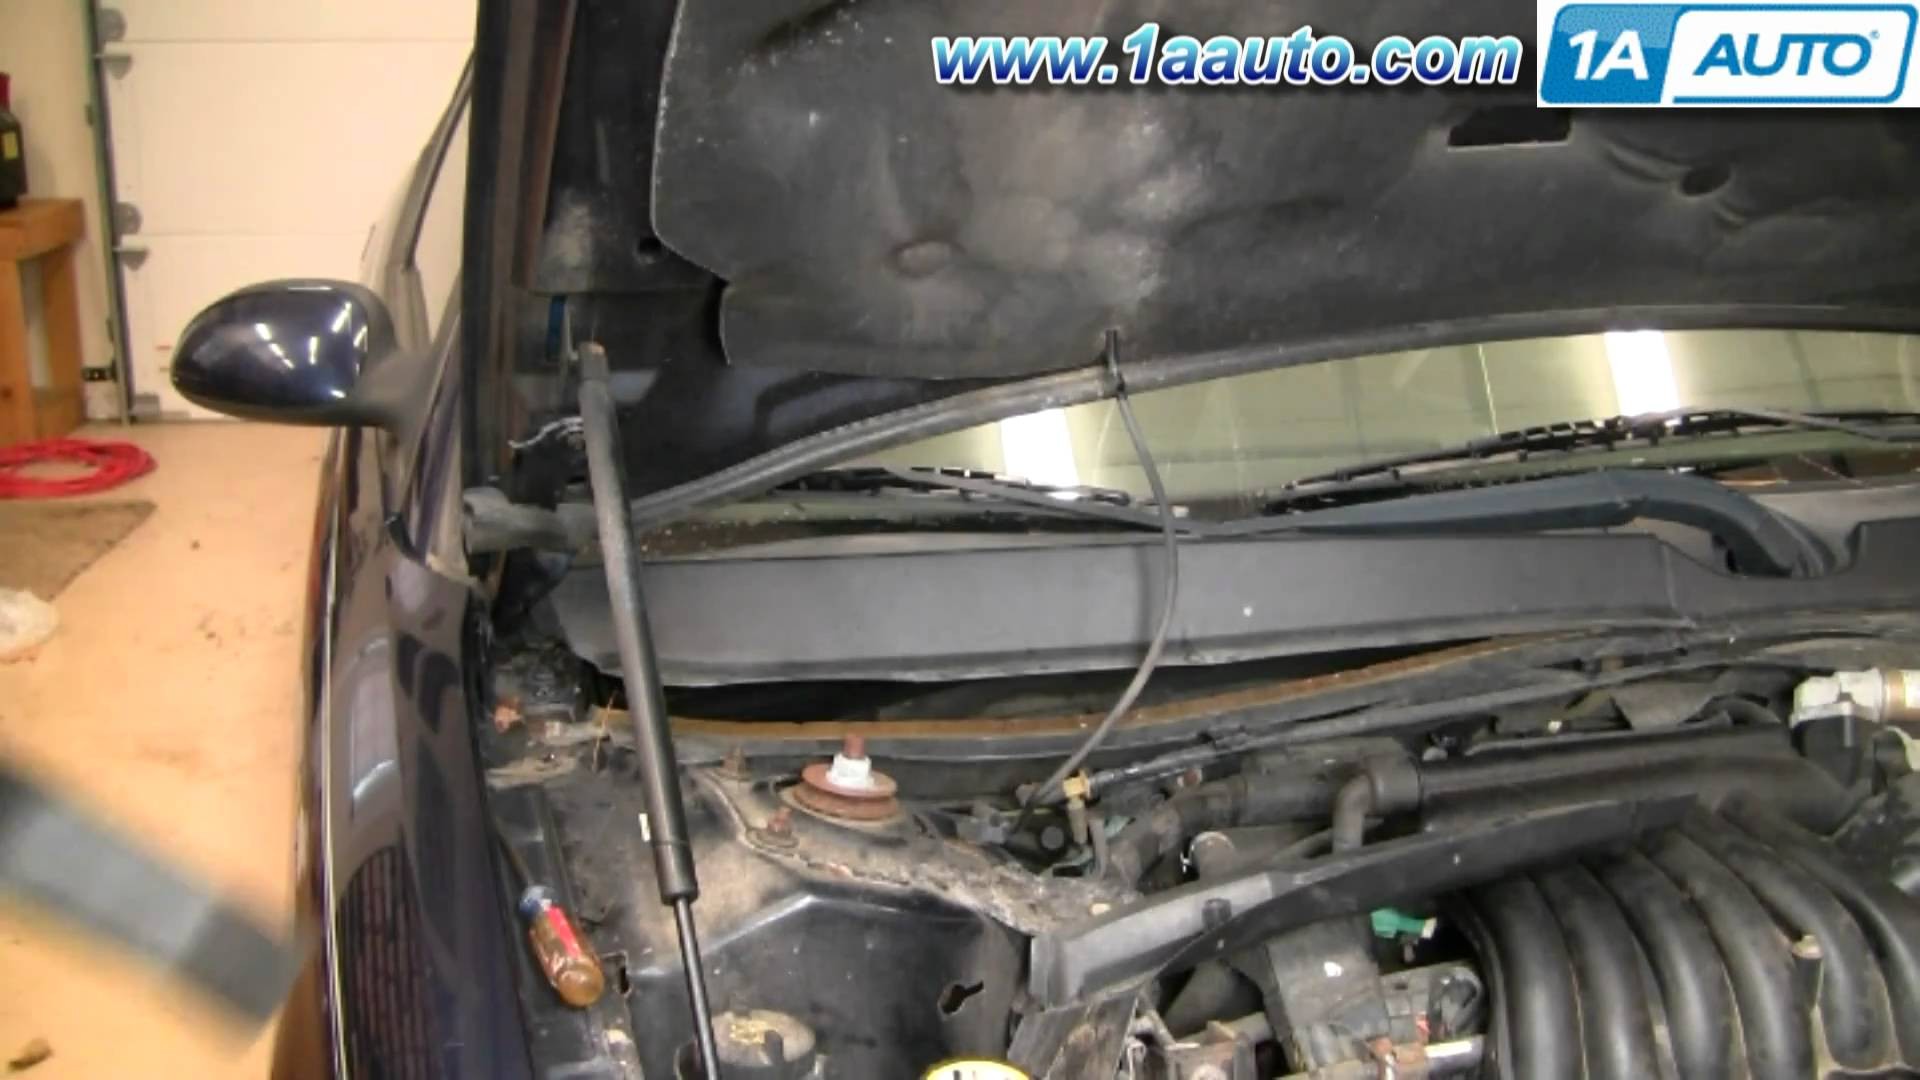 2000 Mercury Sable Engine Diagram How to Install Replace Cabin Air Filter ford Taurus Mercury Sable 96 Of 2000 Mercury Sable Engine Diagram